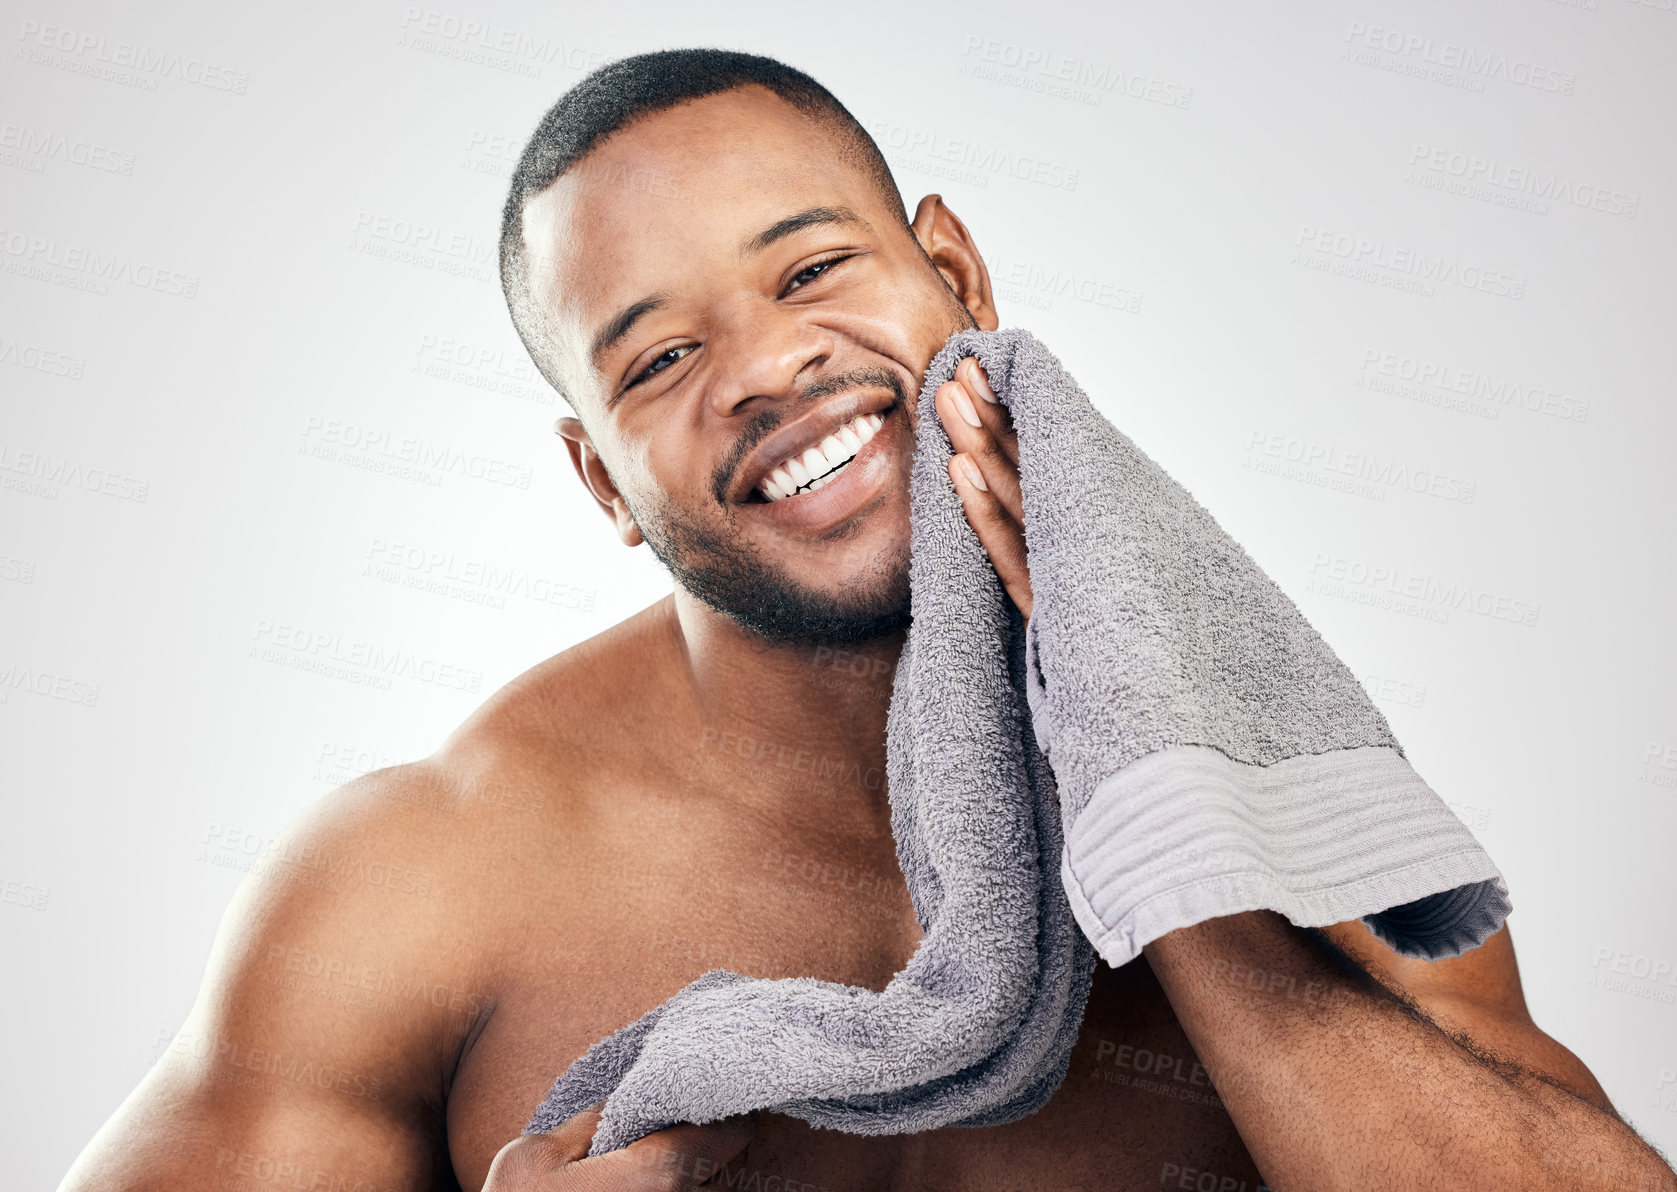 Buy stock photo Studio portrait of a handsome young man wiping his face with a towel against a white background